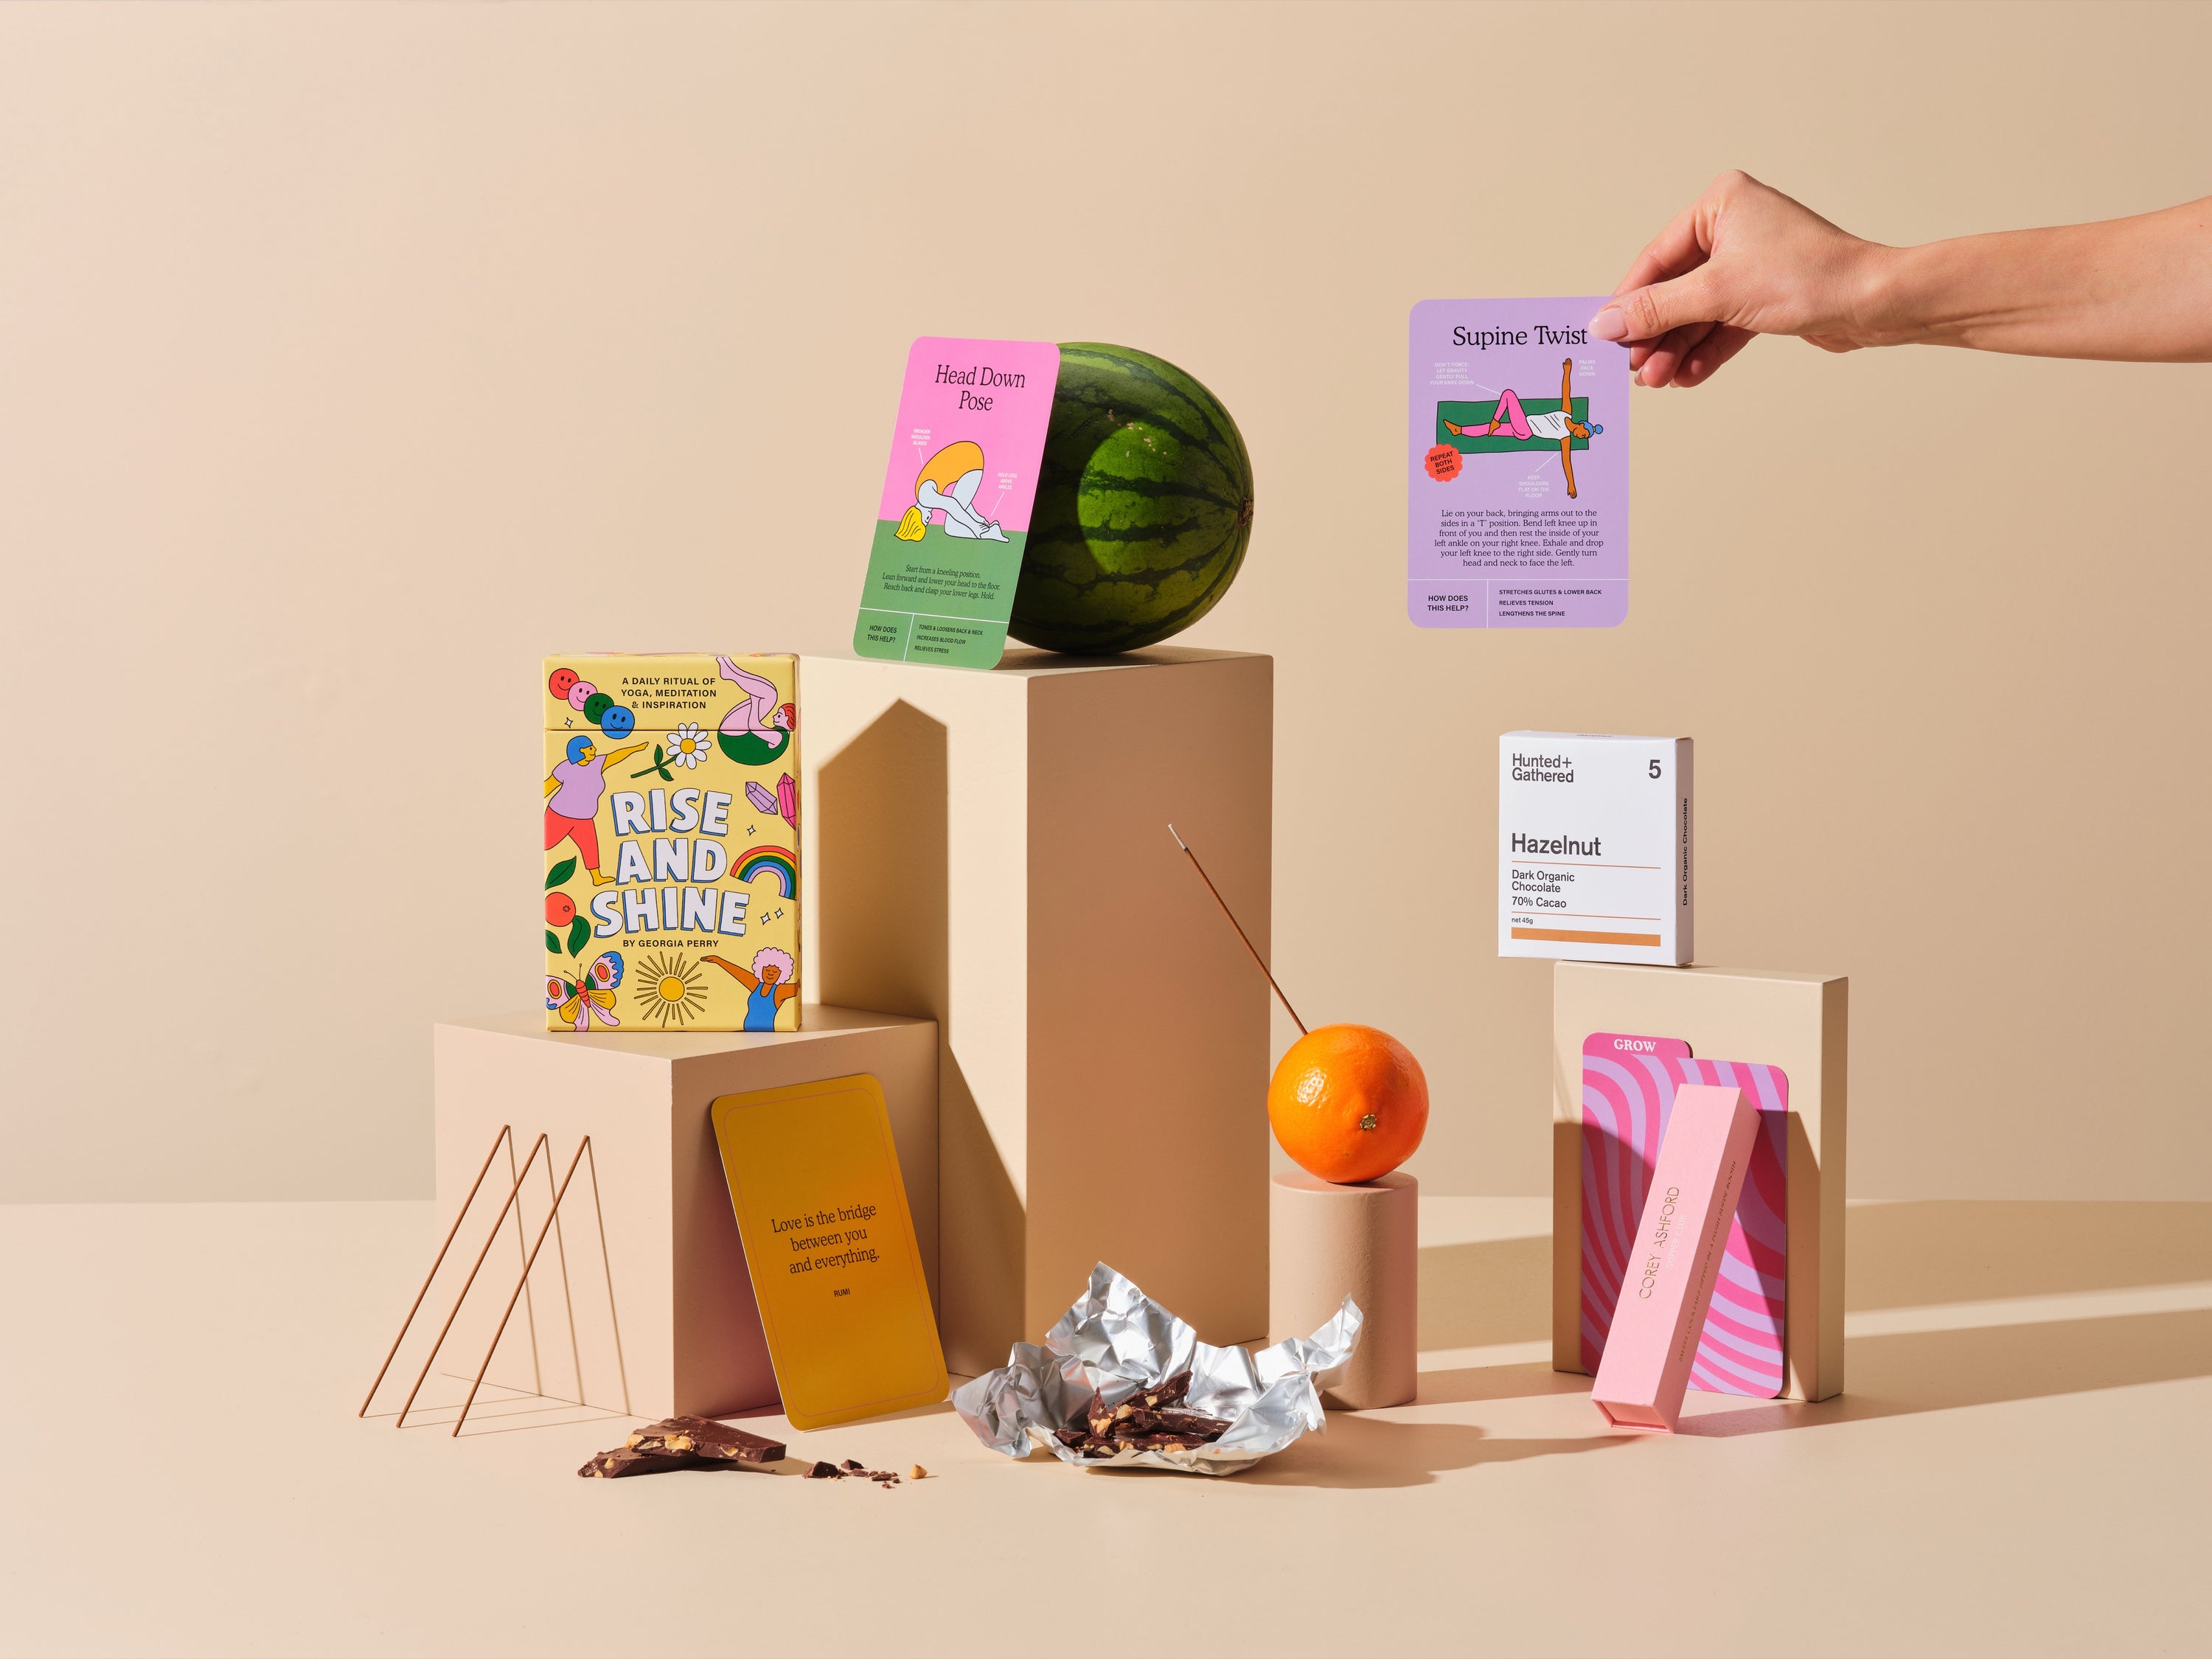 Our guide to mindful gifting